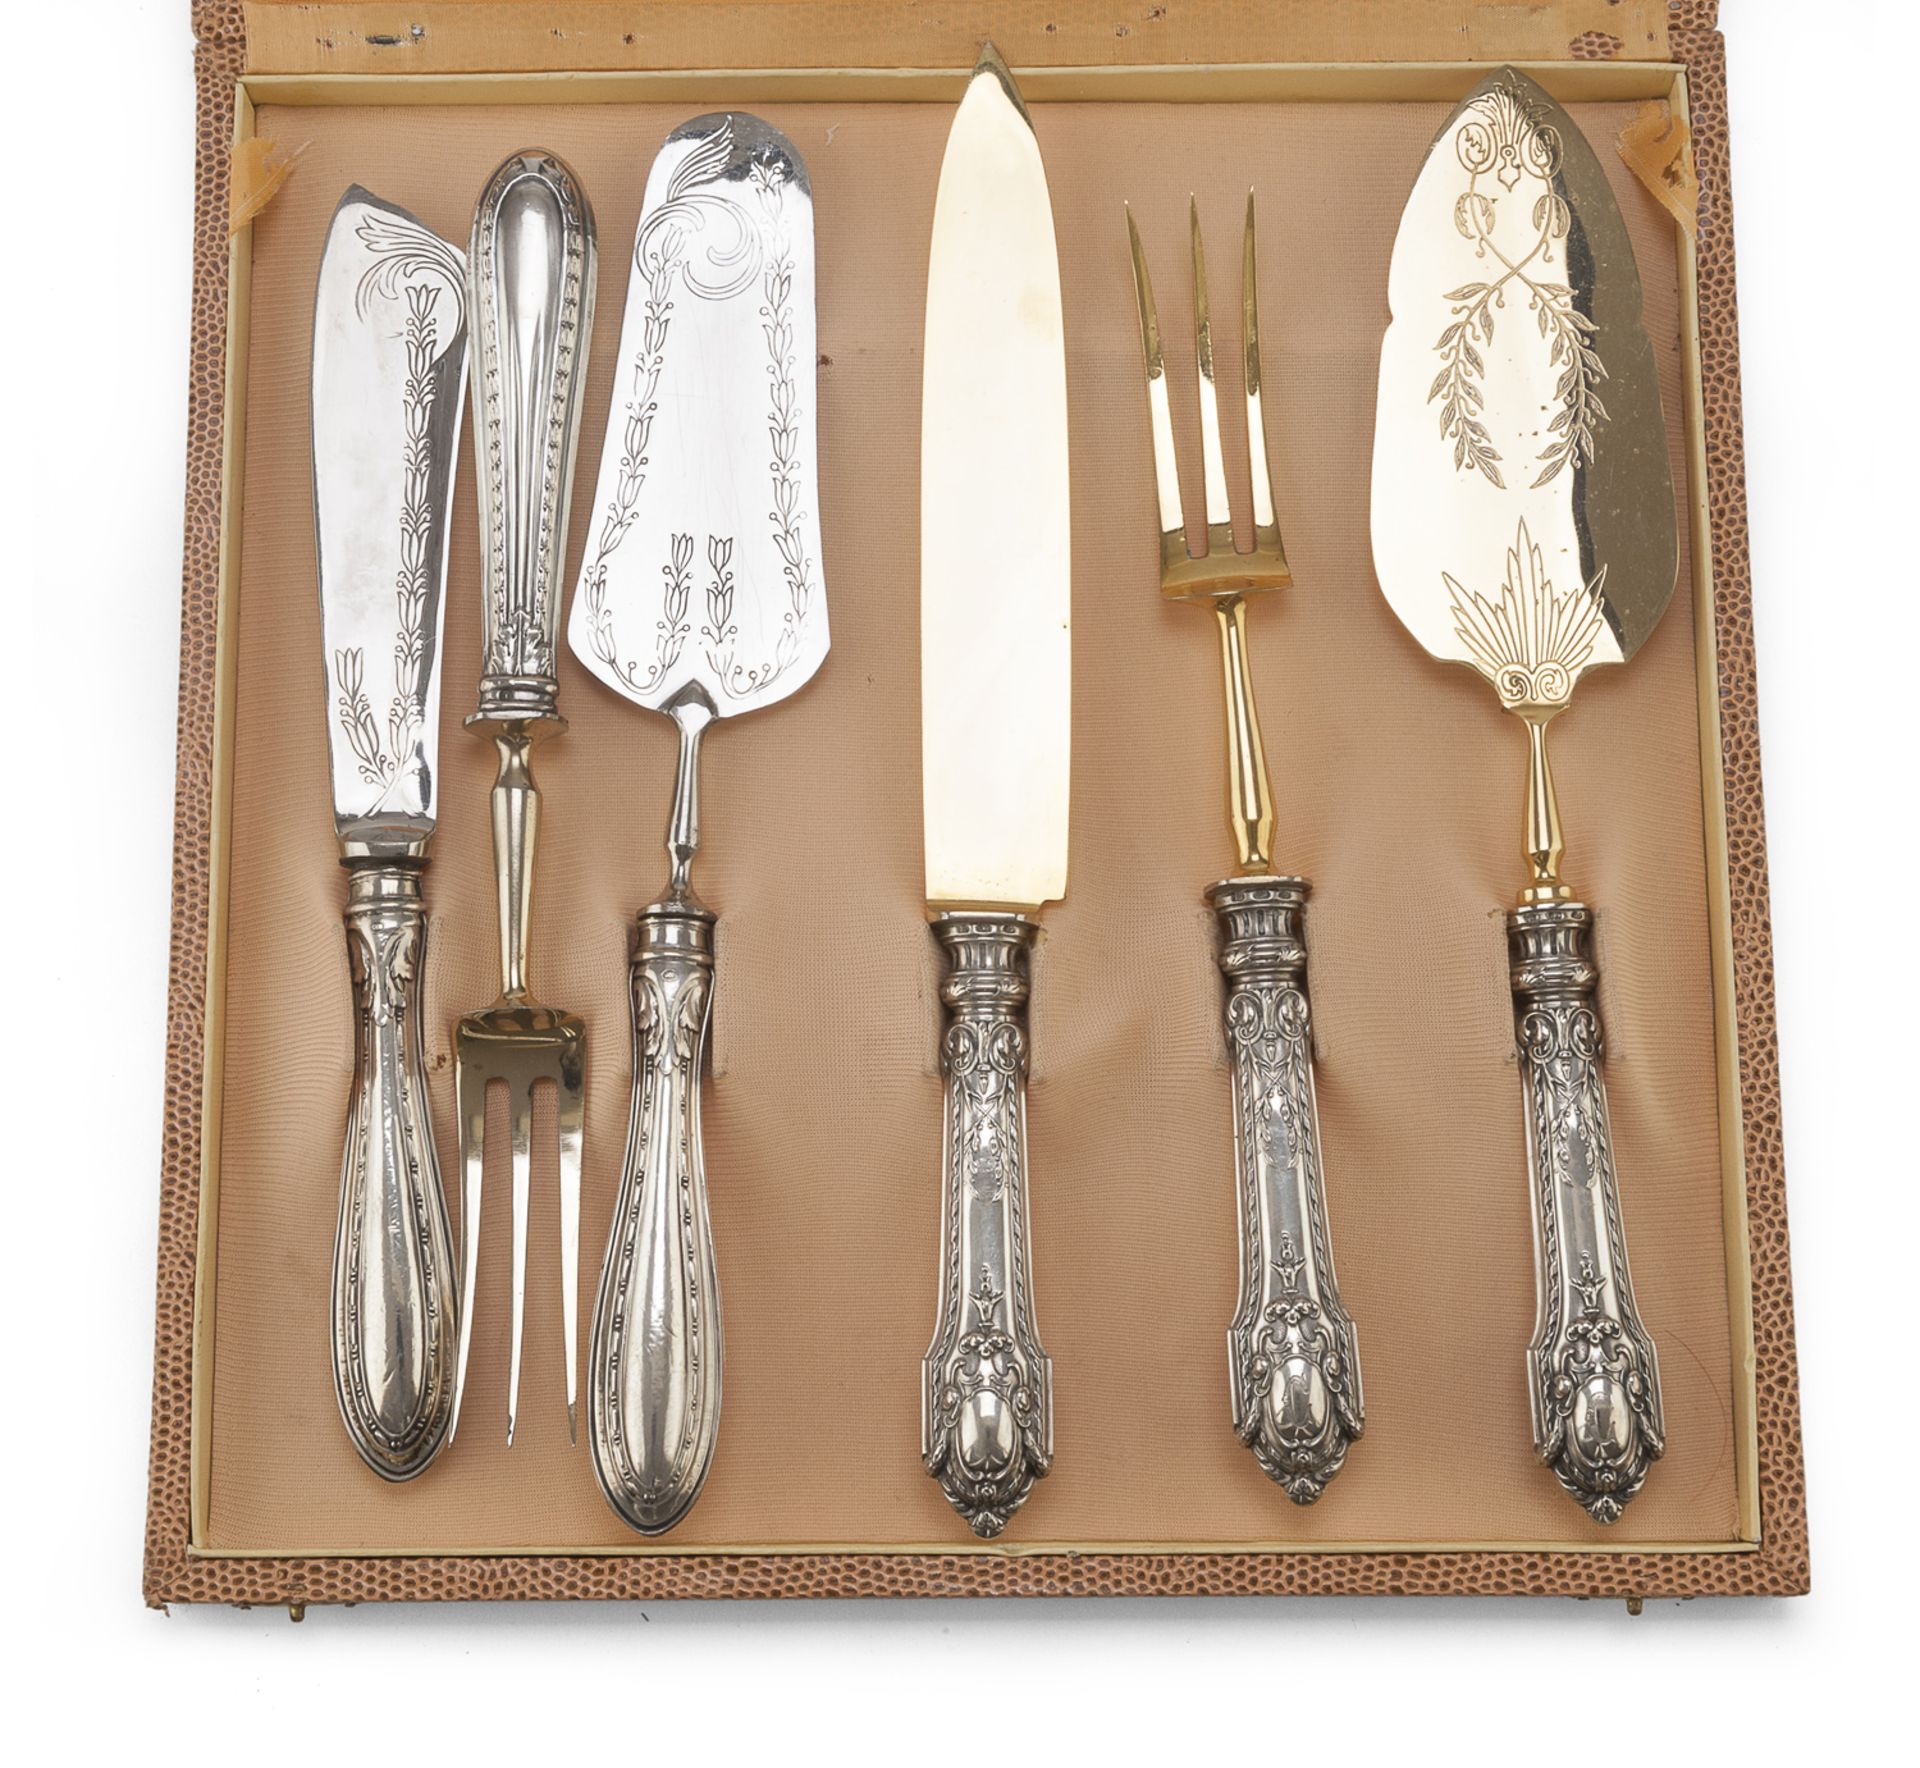 TWO DESSERT CUTLERY SETS ITALY 20th CENTURY